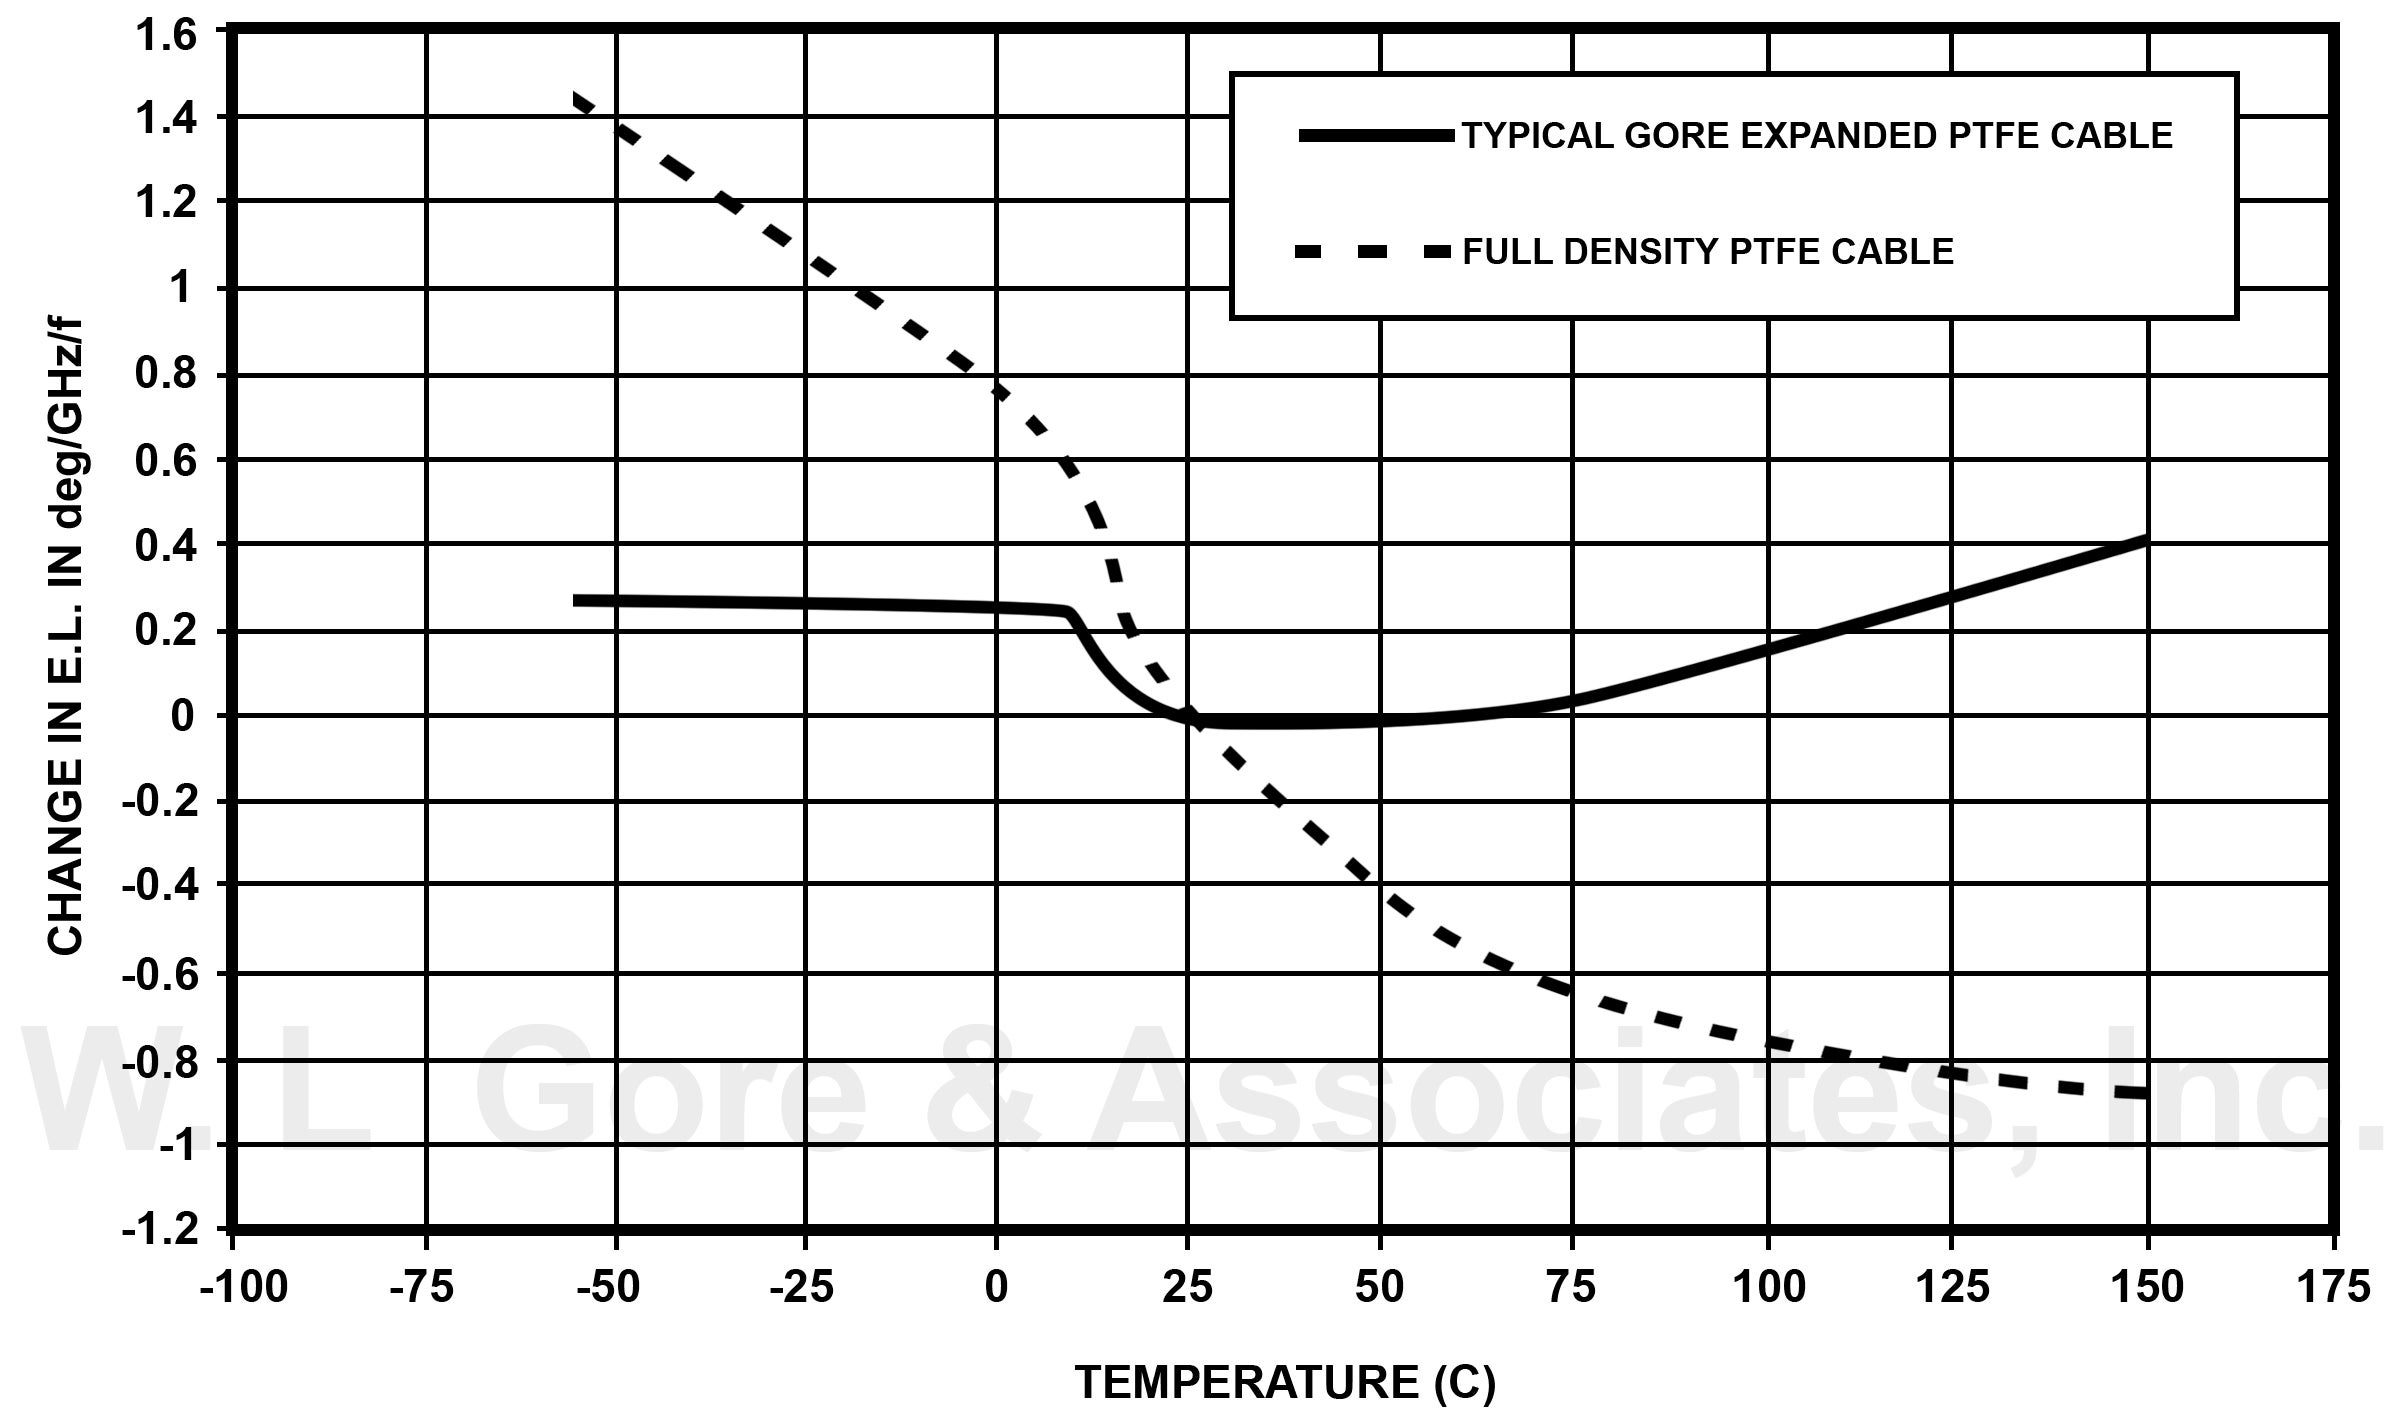 Change in electrical length with temperature: Gore expanded PTFE cable vs. full density PTFE cable